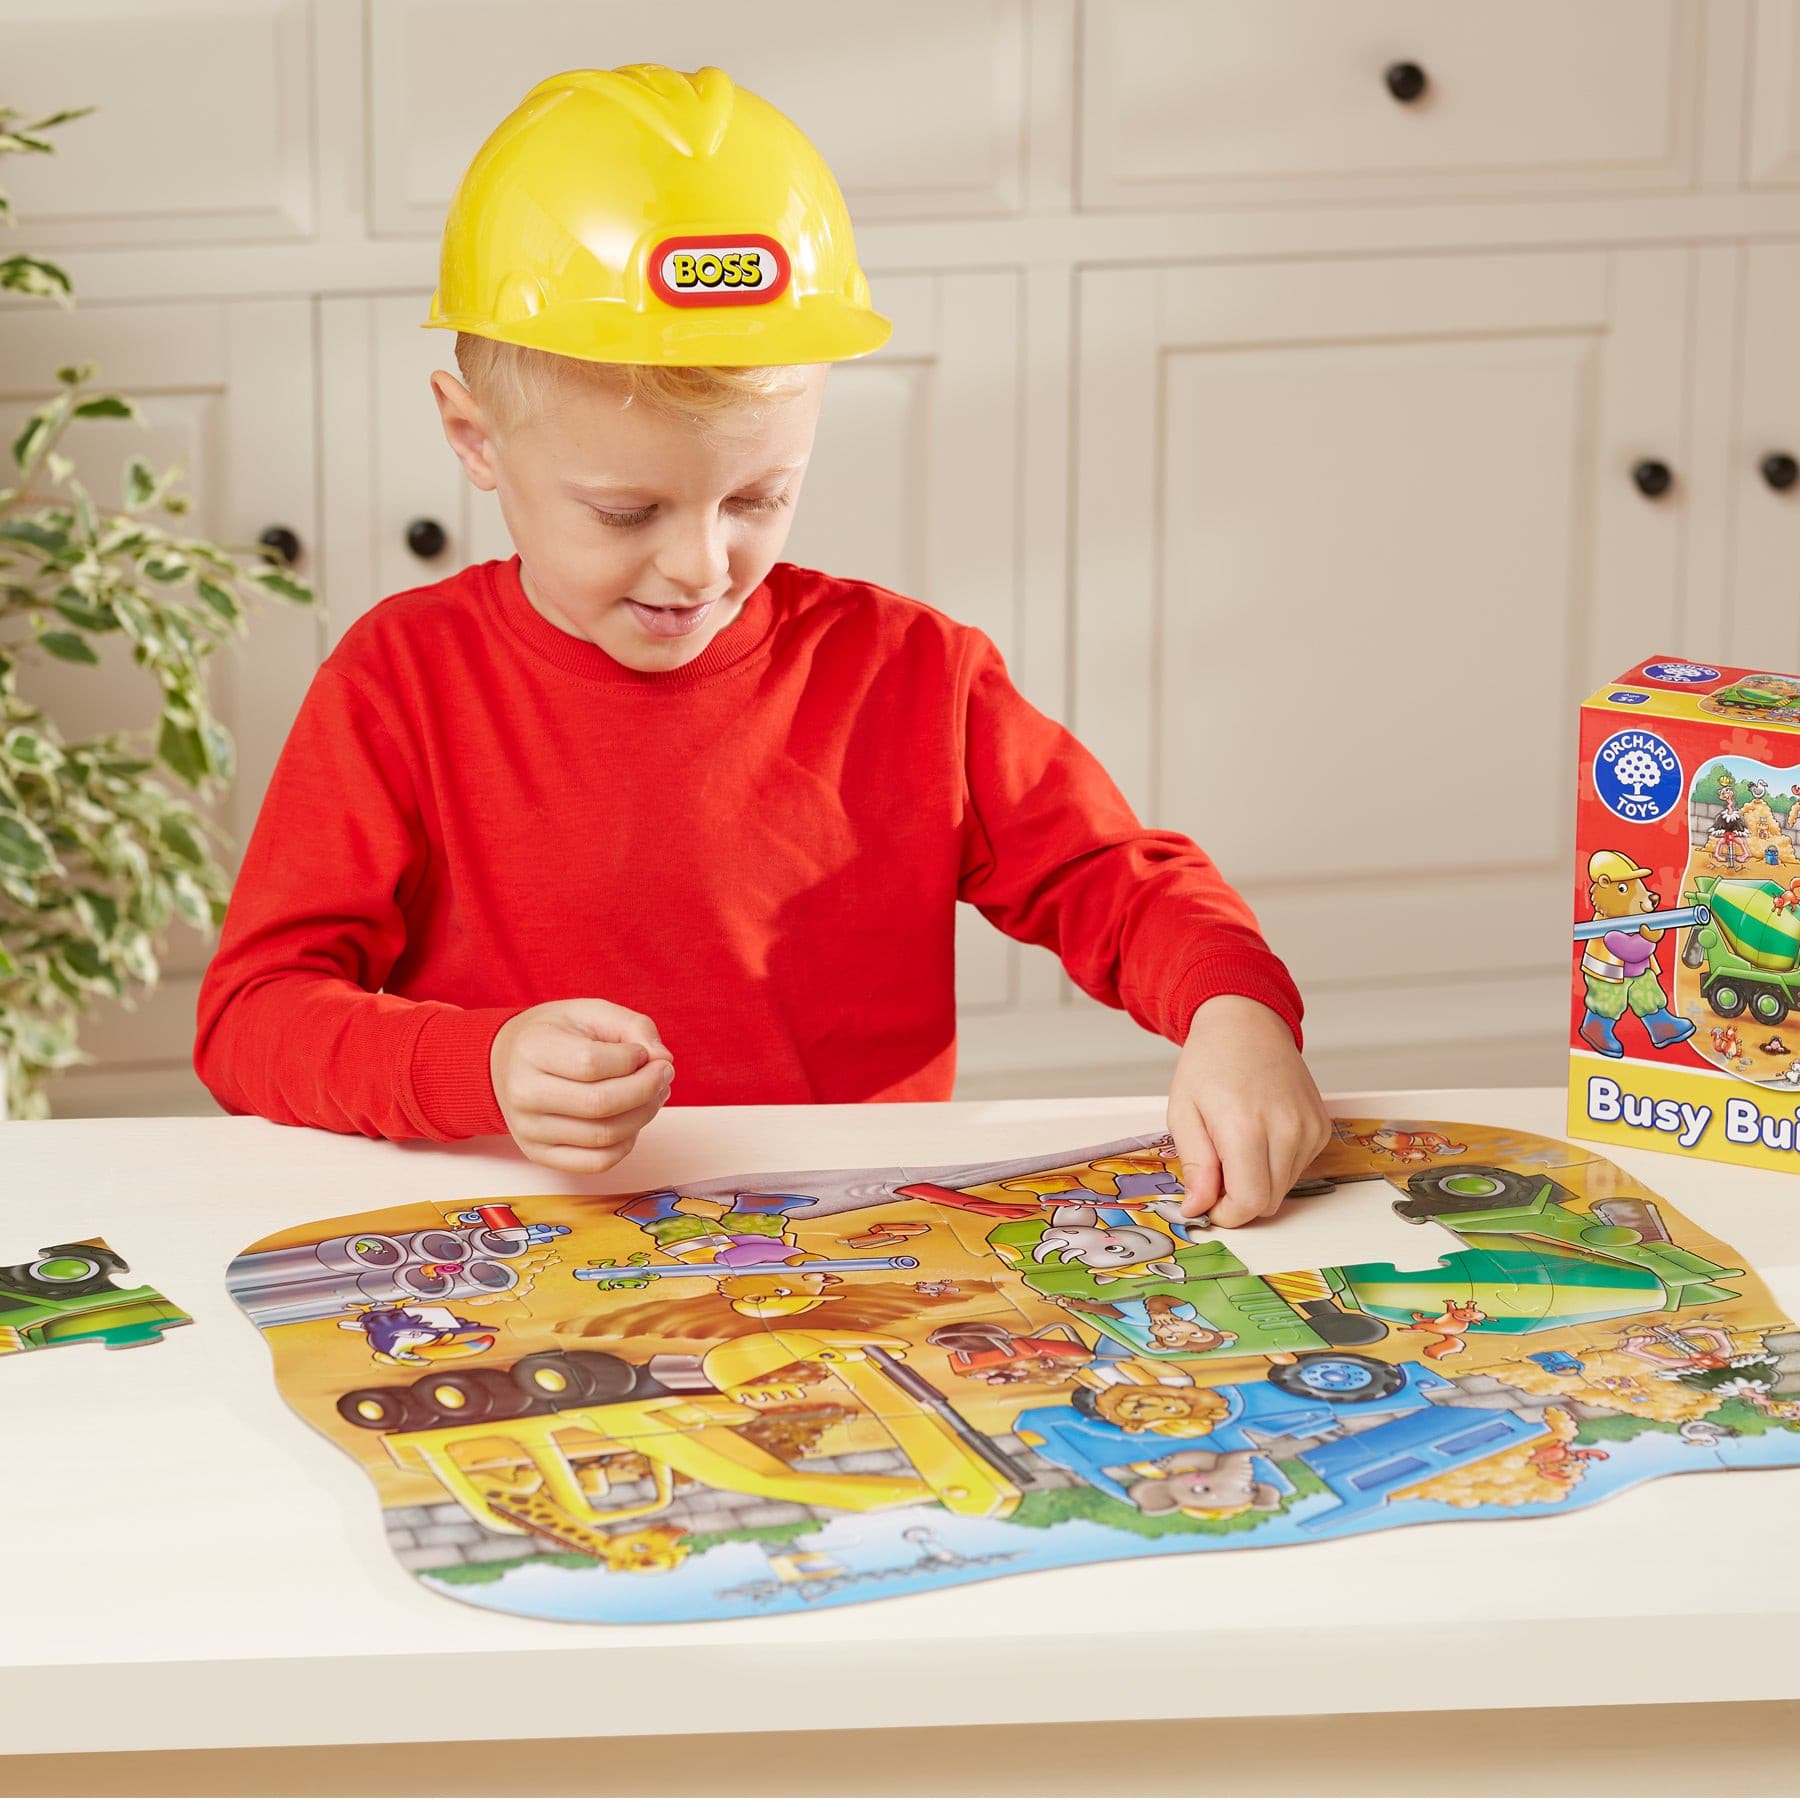  Orchard Toys Busy Builders Jigsaw Puzzle Suitable for ages 3+